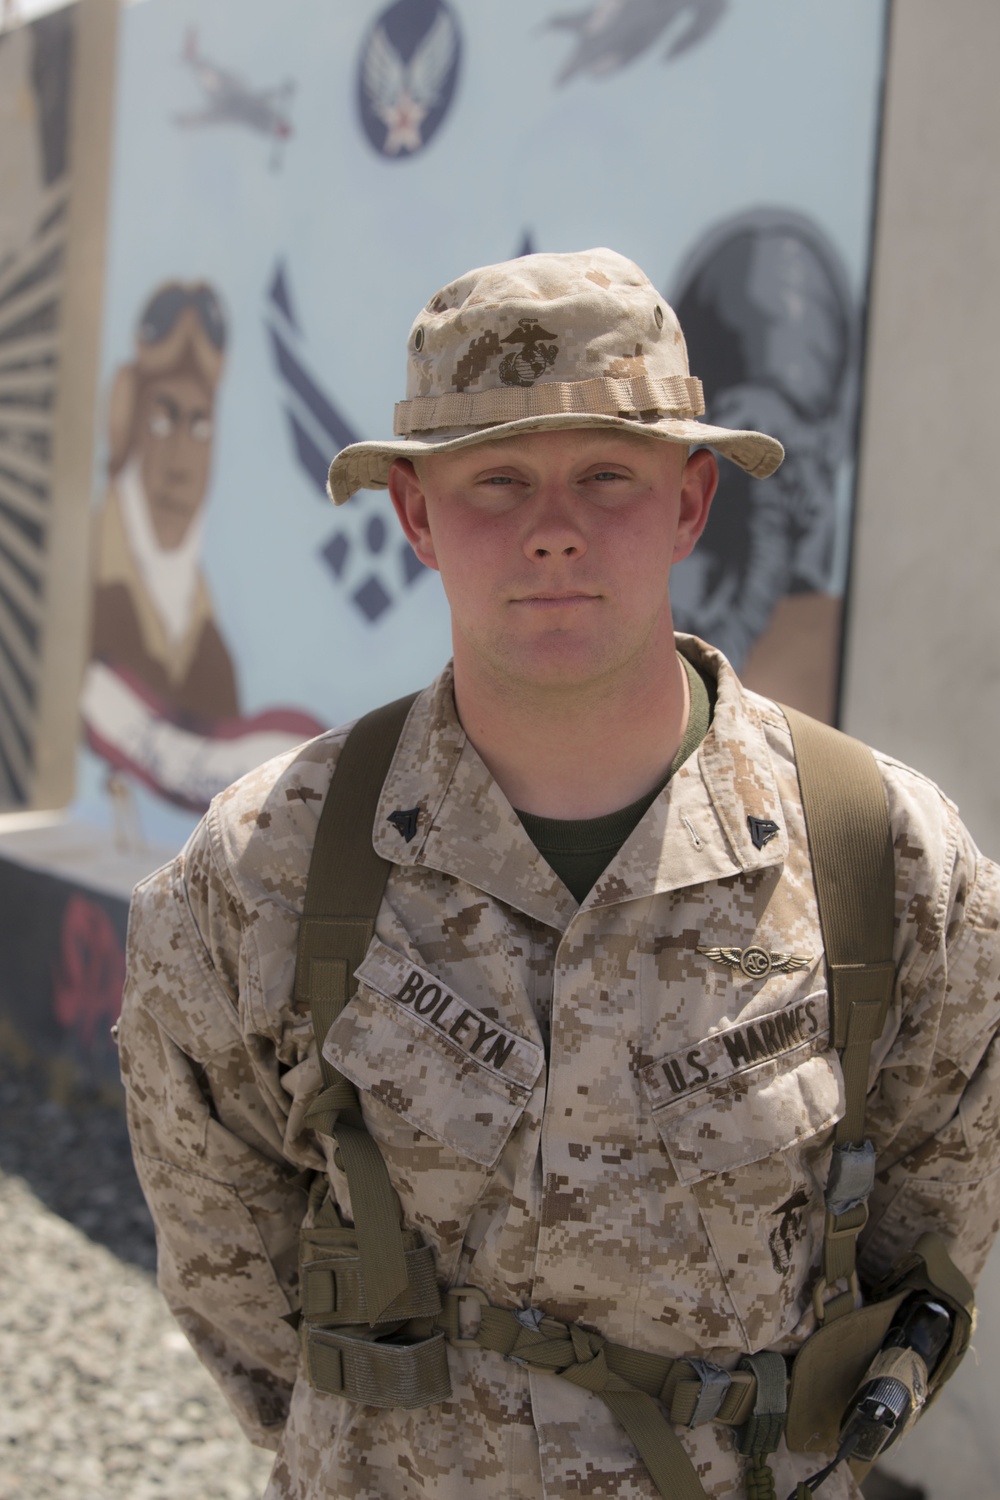 VMM-363 Marine recognized for OIR support